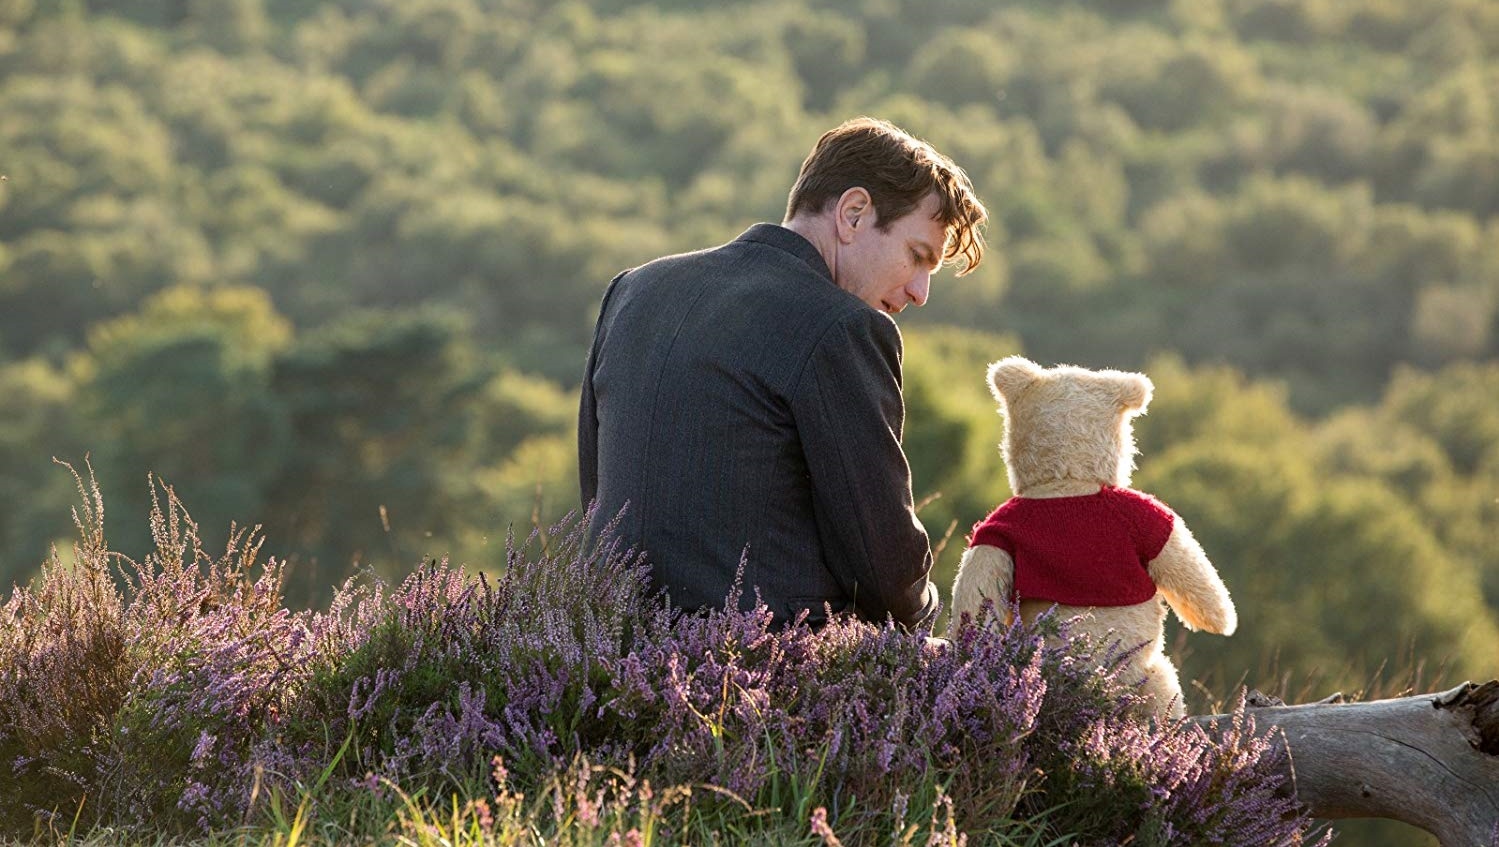 CHRISTOPHER ROBIN is Flawed, but Still Makes an Impression